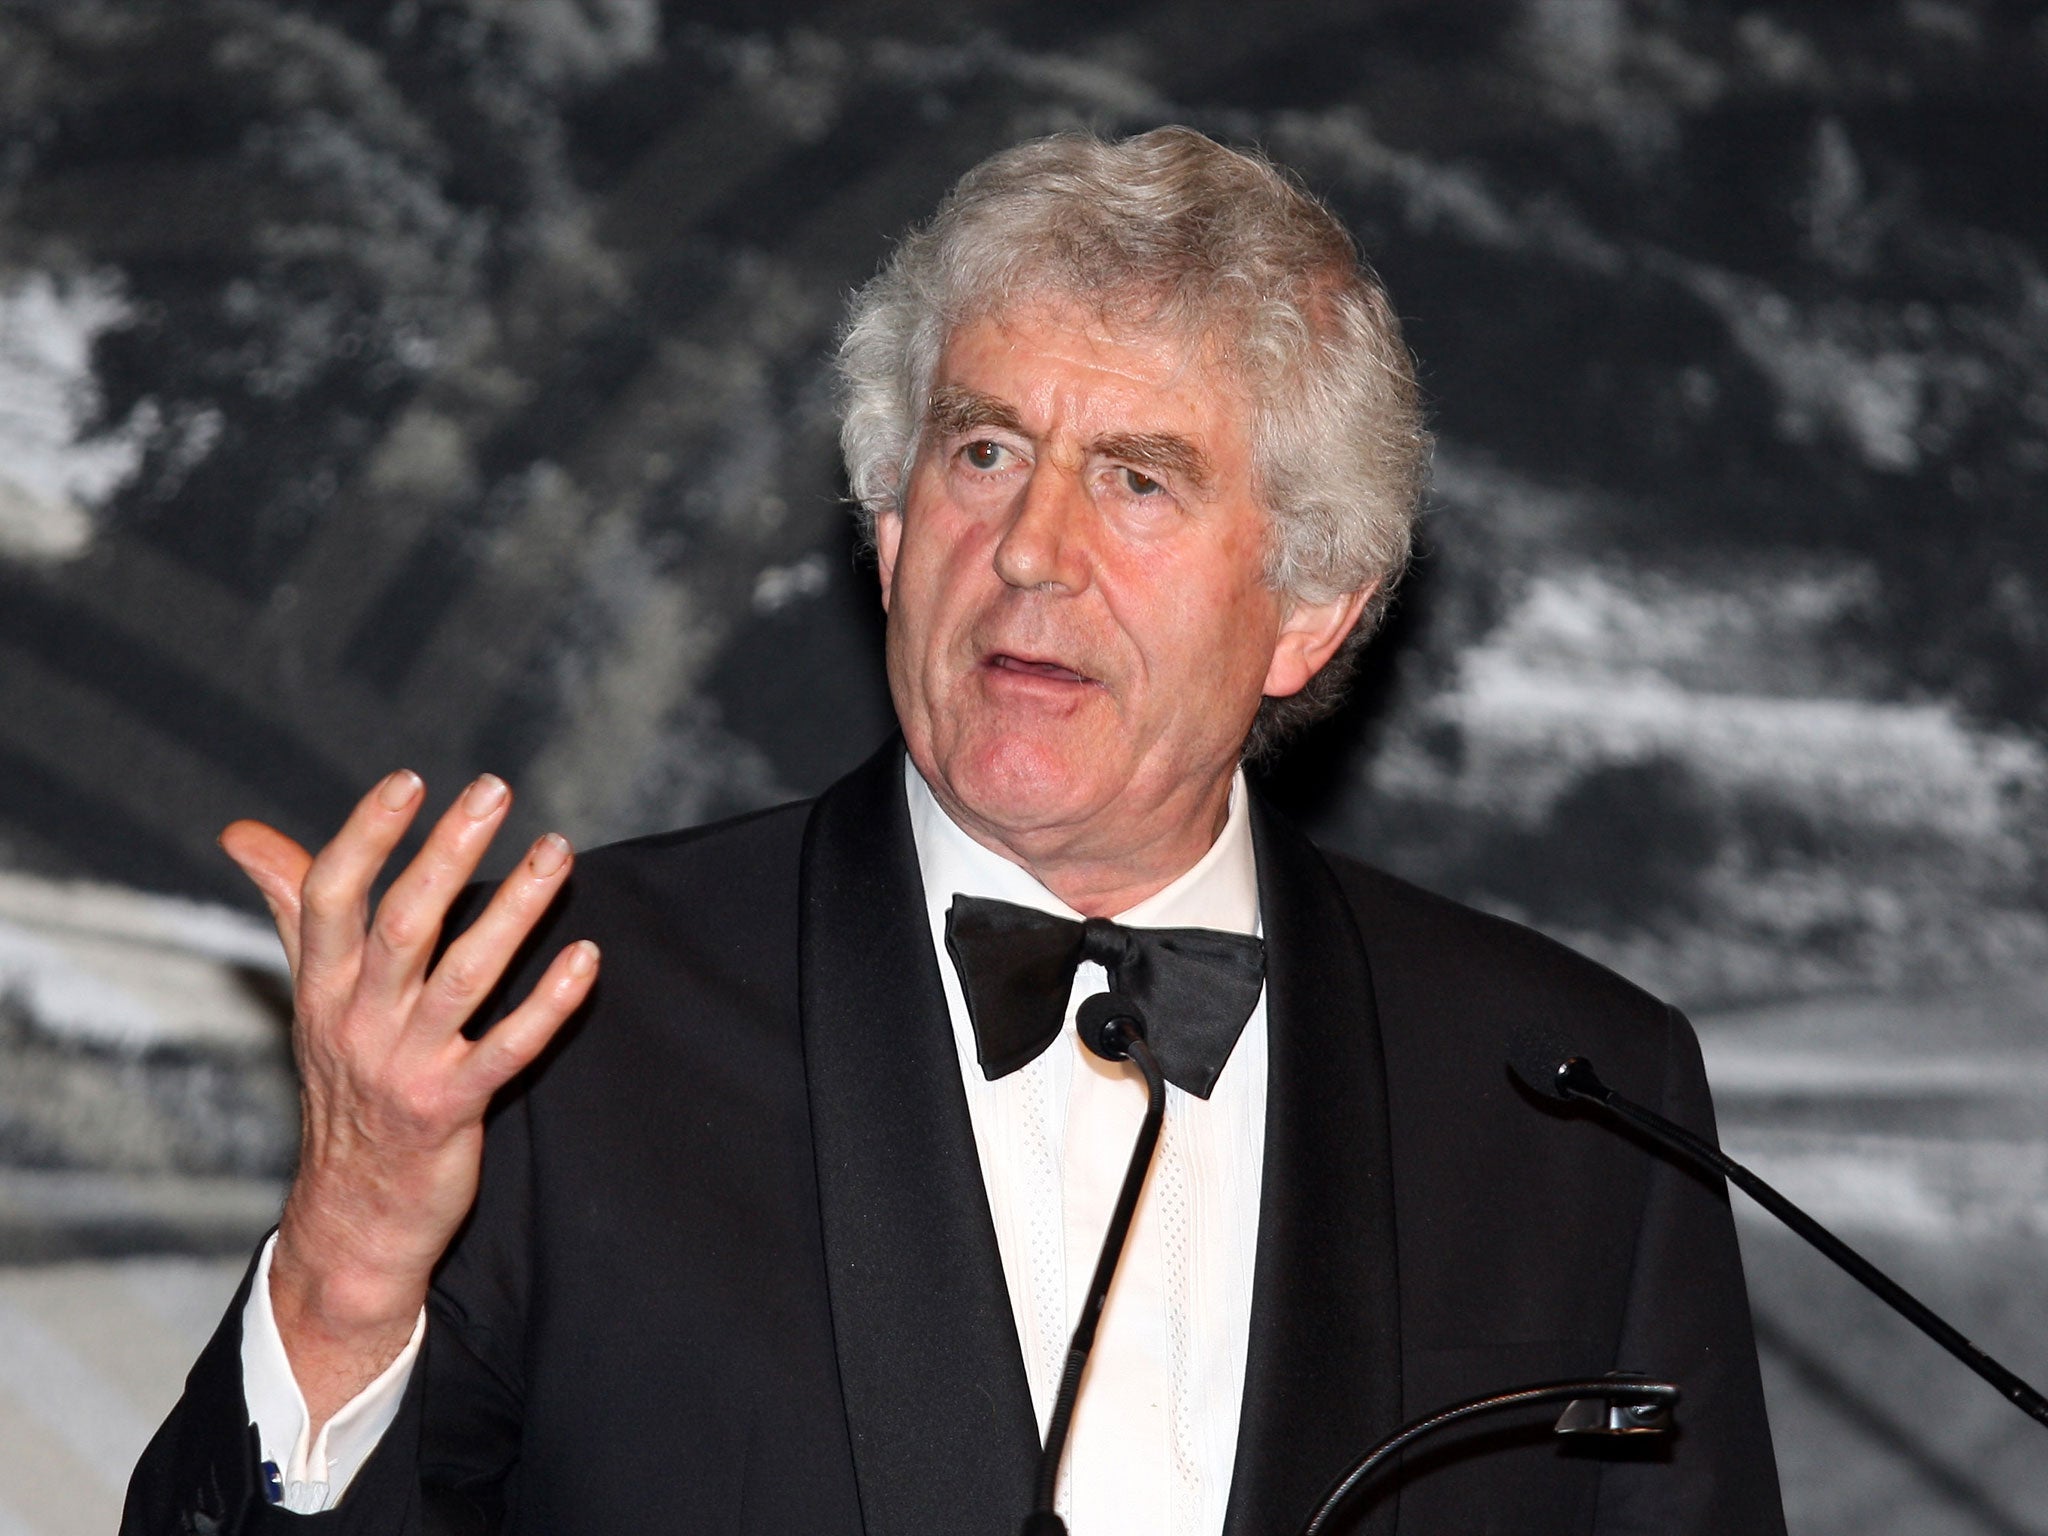 Rhodri Morgan speaking at the Ryder Cup gold tournament in 2009